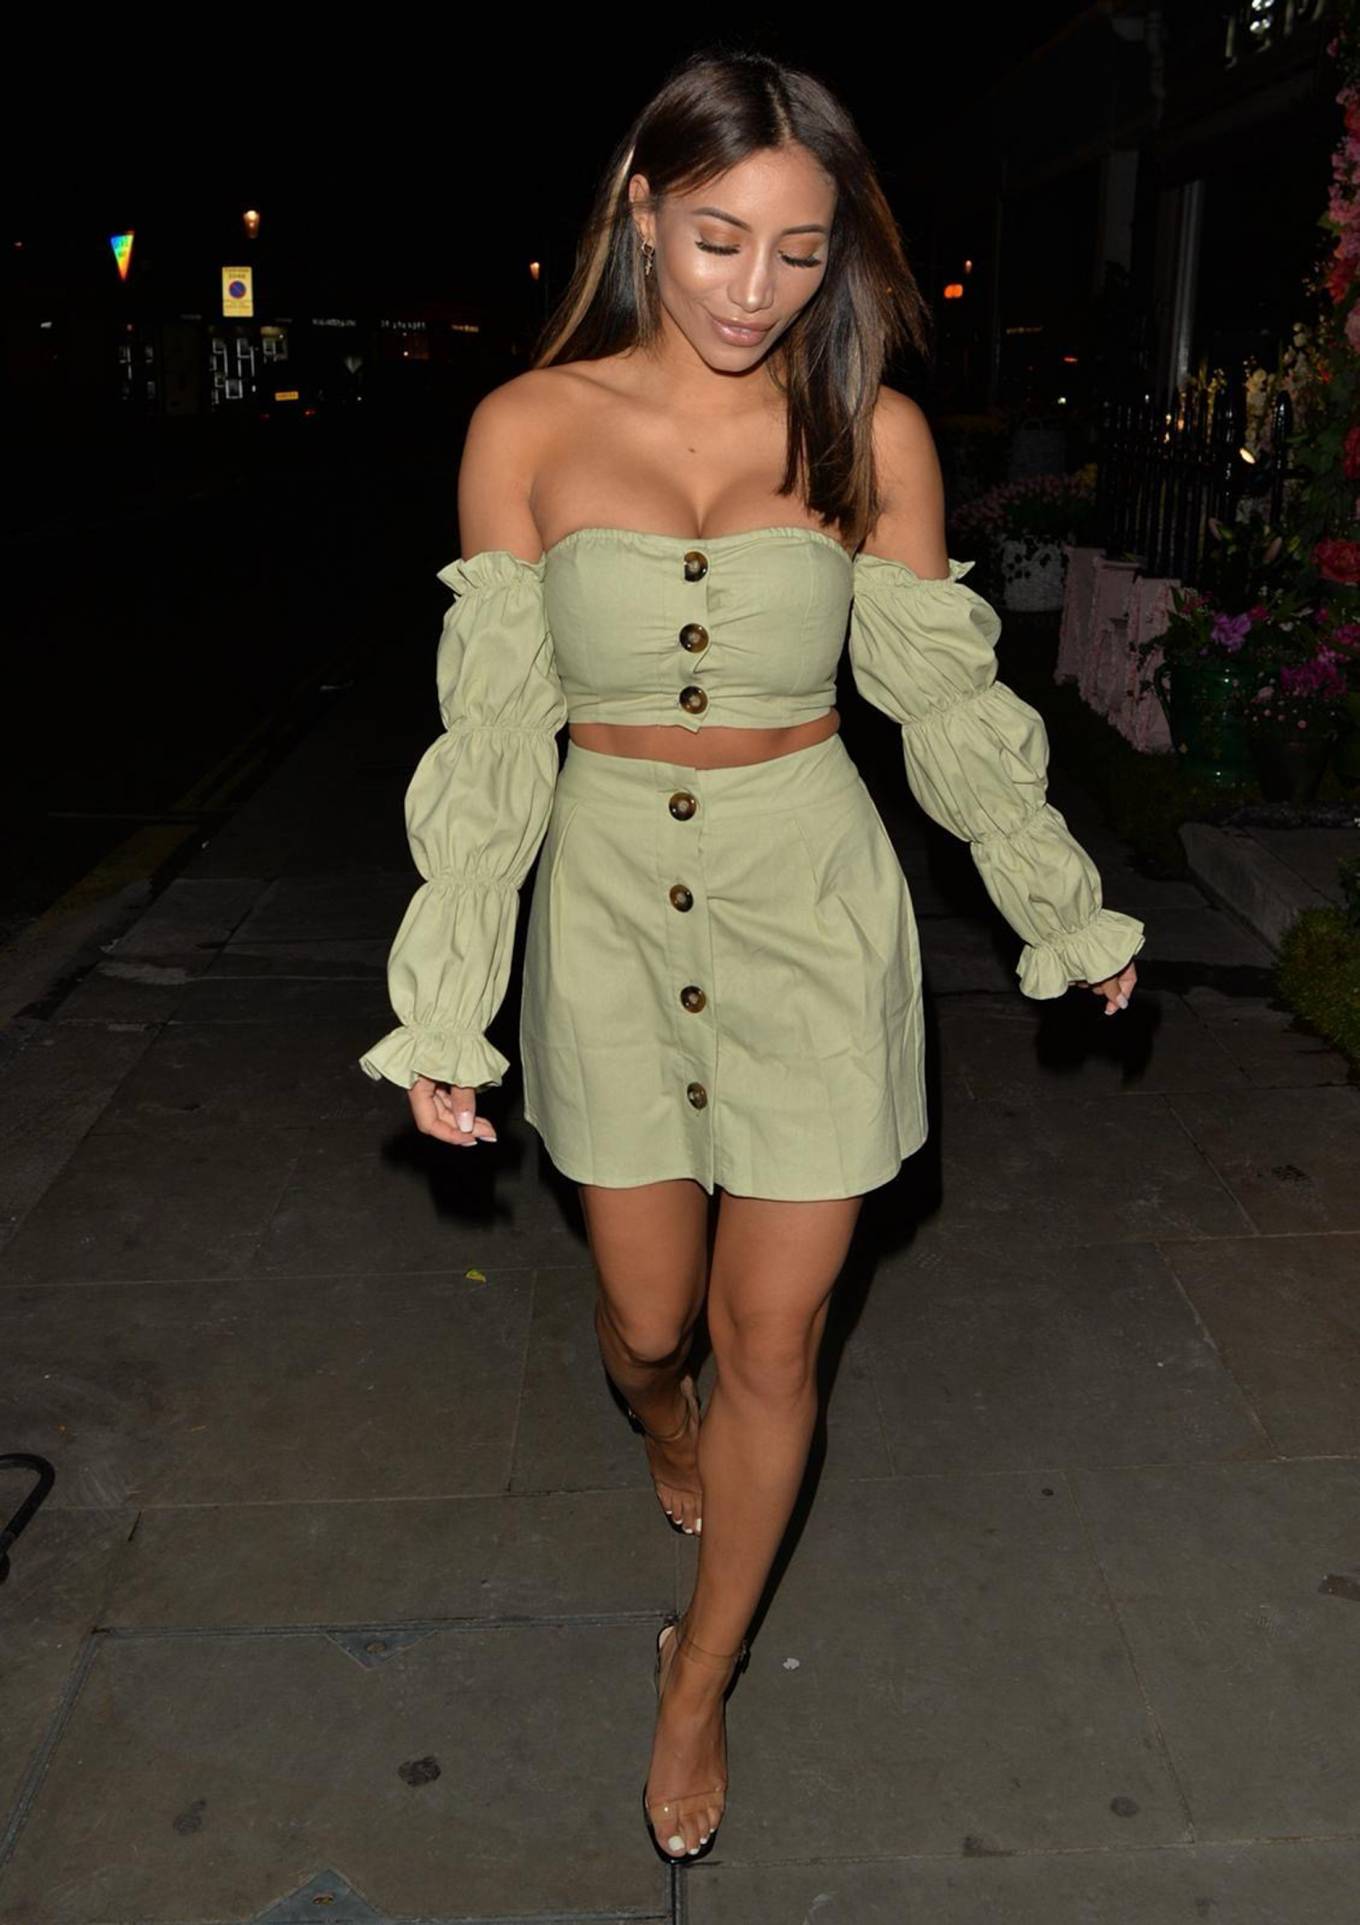 Kayleigh Morris 2020 : Kayleigh Morris – Looking chic while night out in London-13